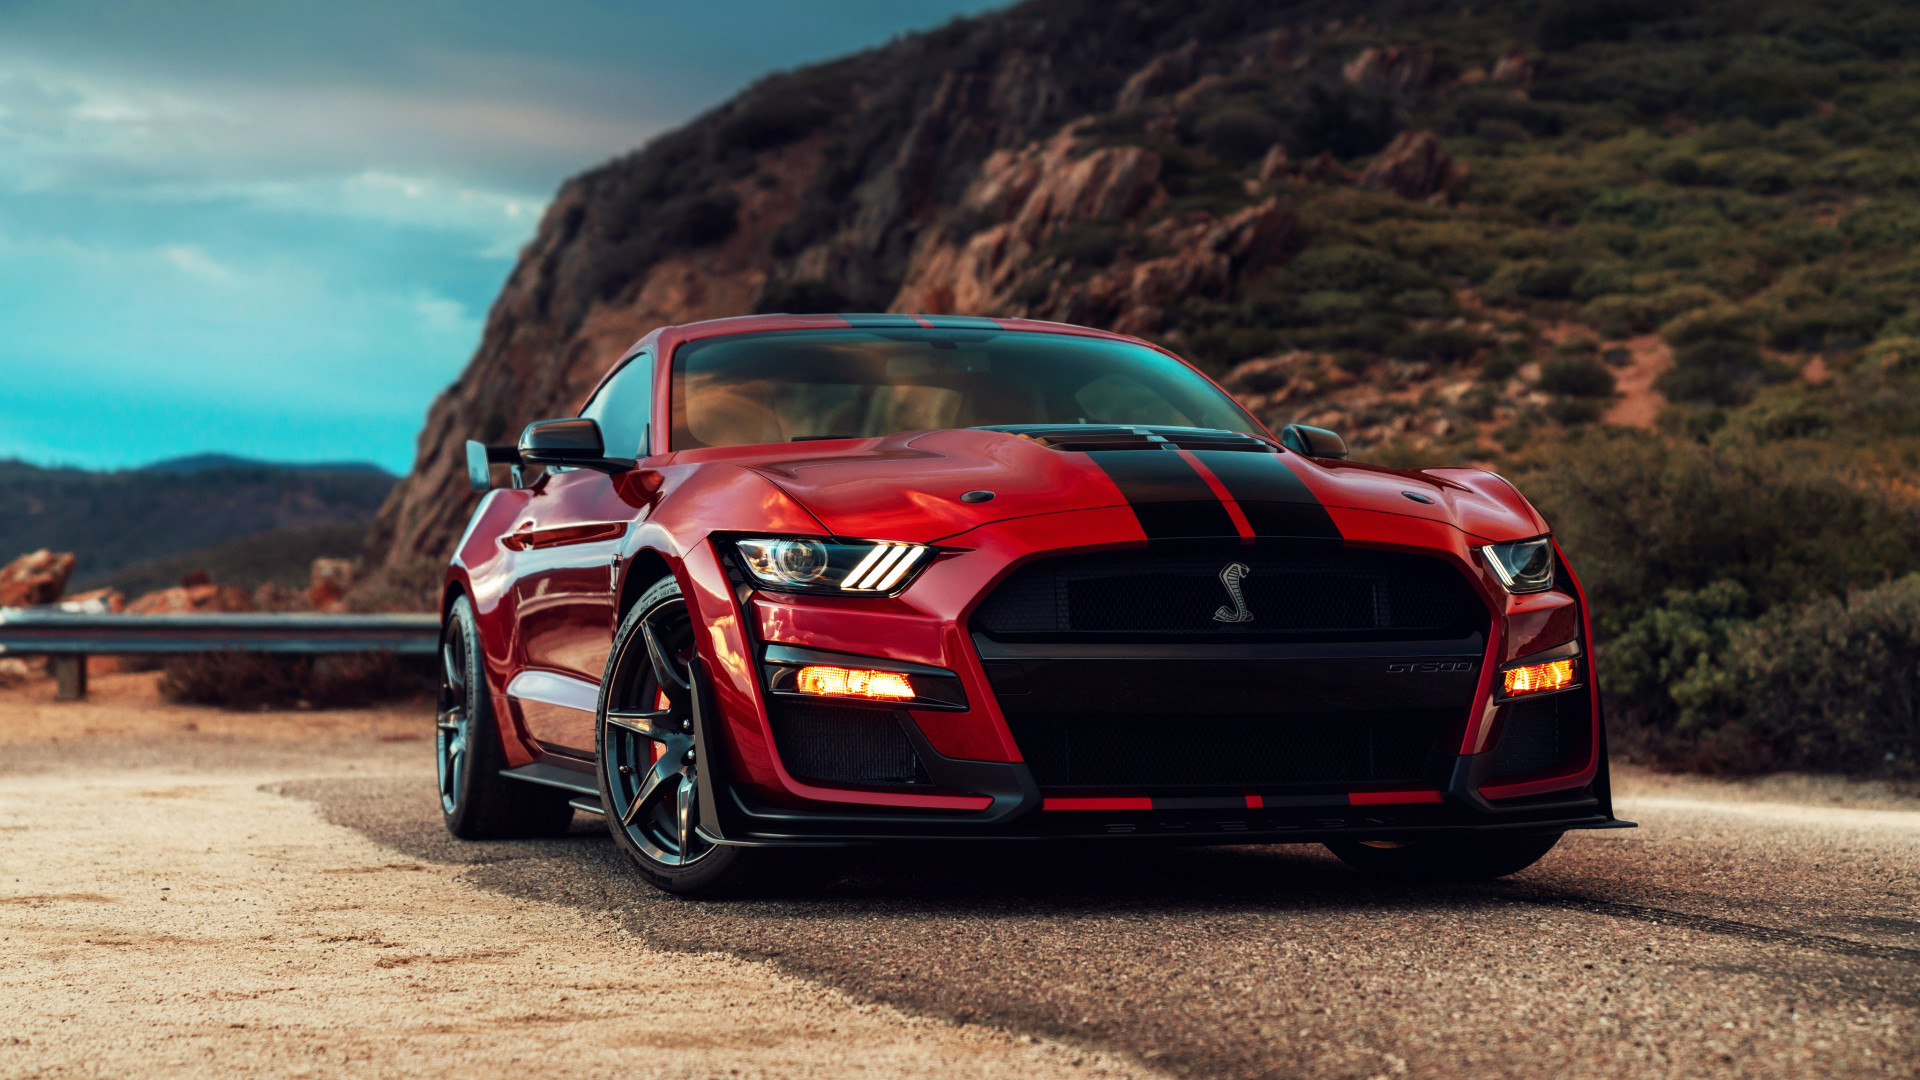 Ford Mustang Shelby GT500 wallpaper 1920x1080